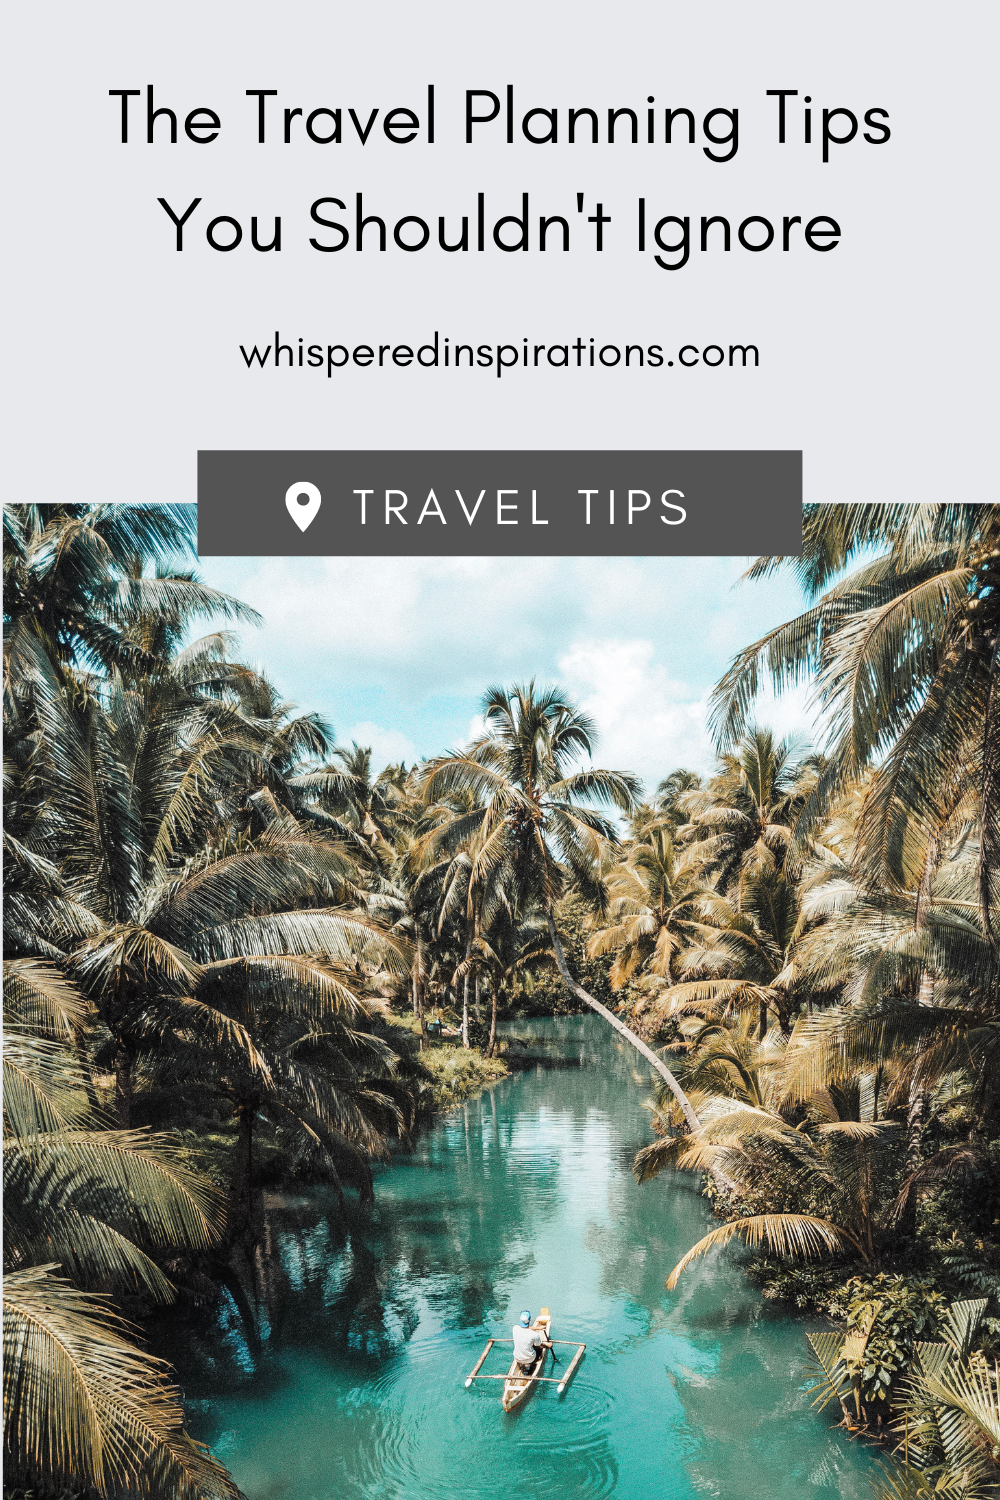 A man paddles in a boat through turquoise waters with palm trees on both sides. This article covers travel planning tips you shouldn't ignore.